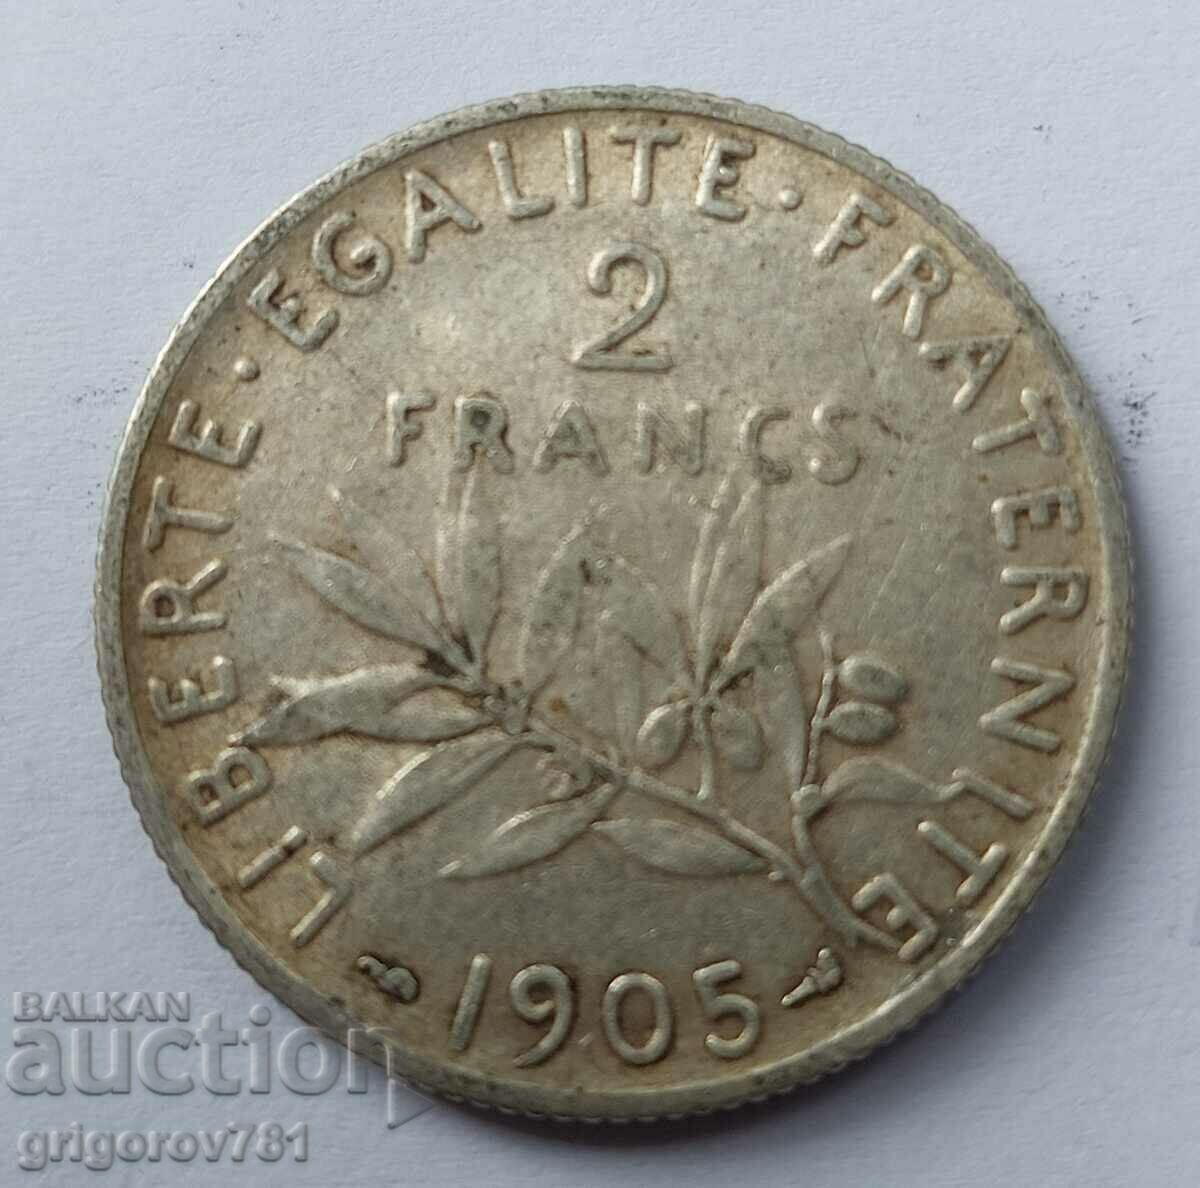 2 francs silver France 1905 - silver coin №19